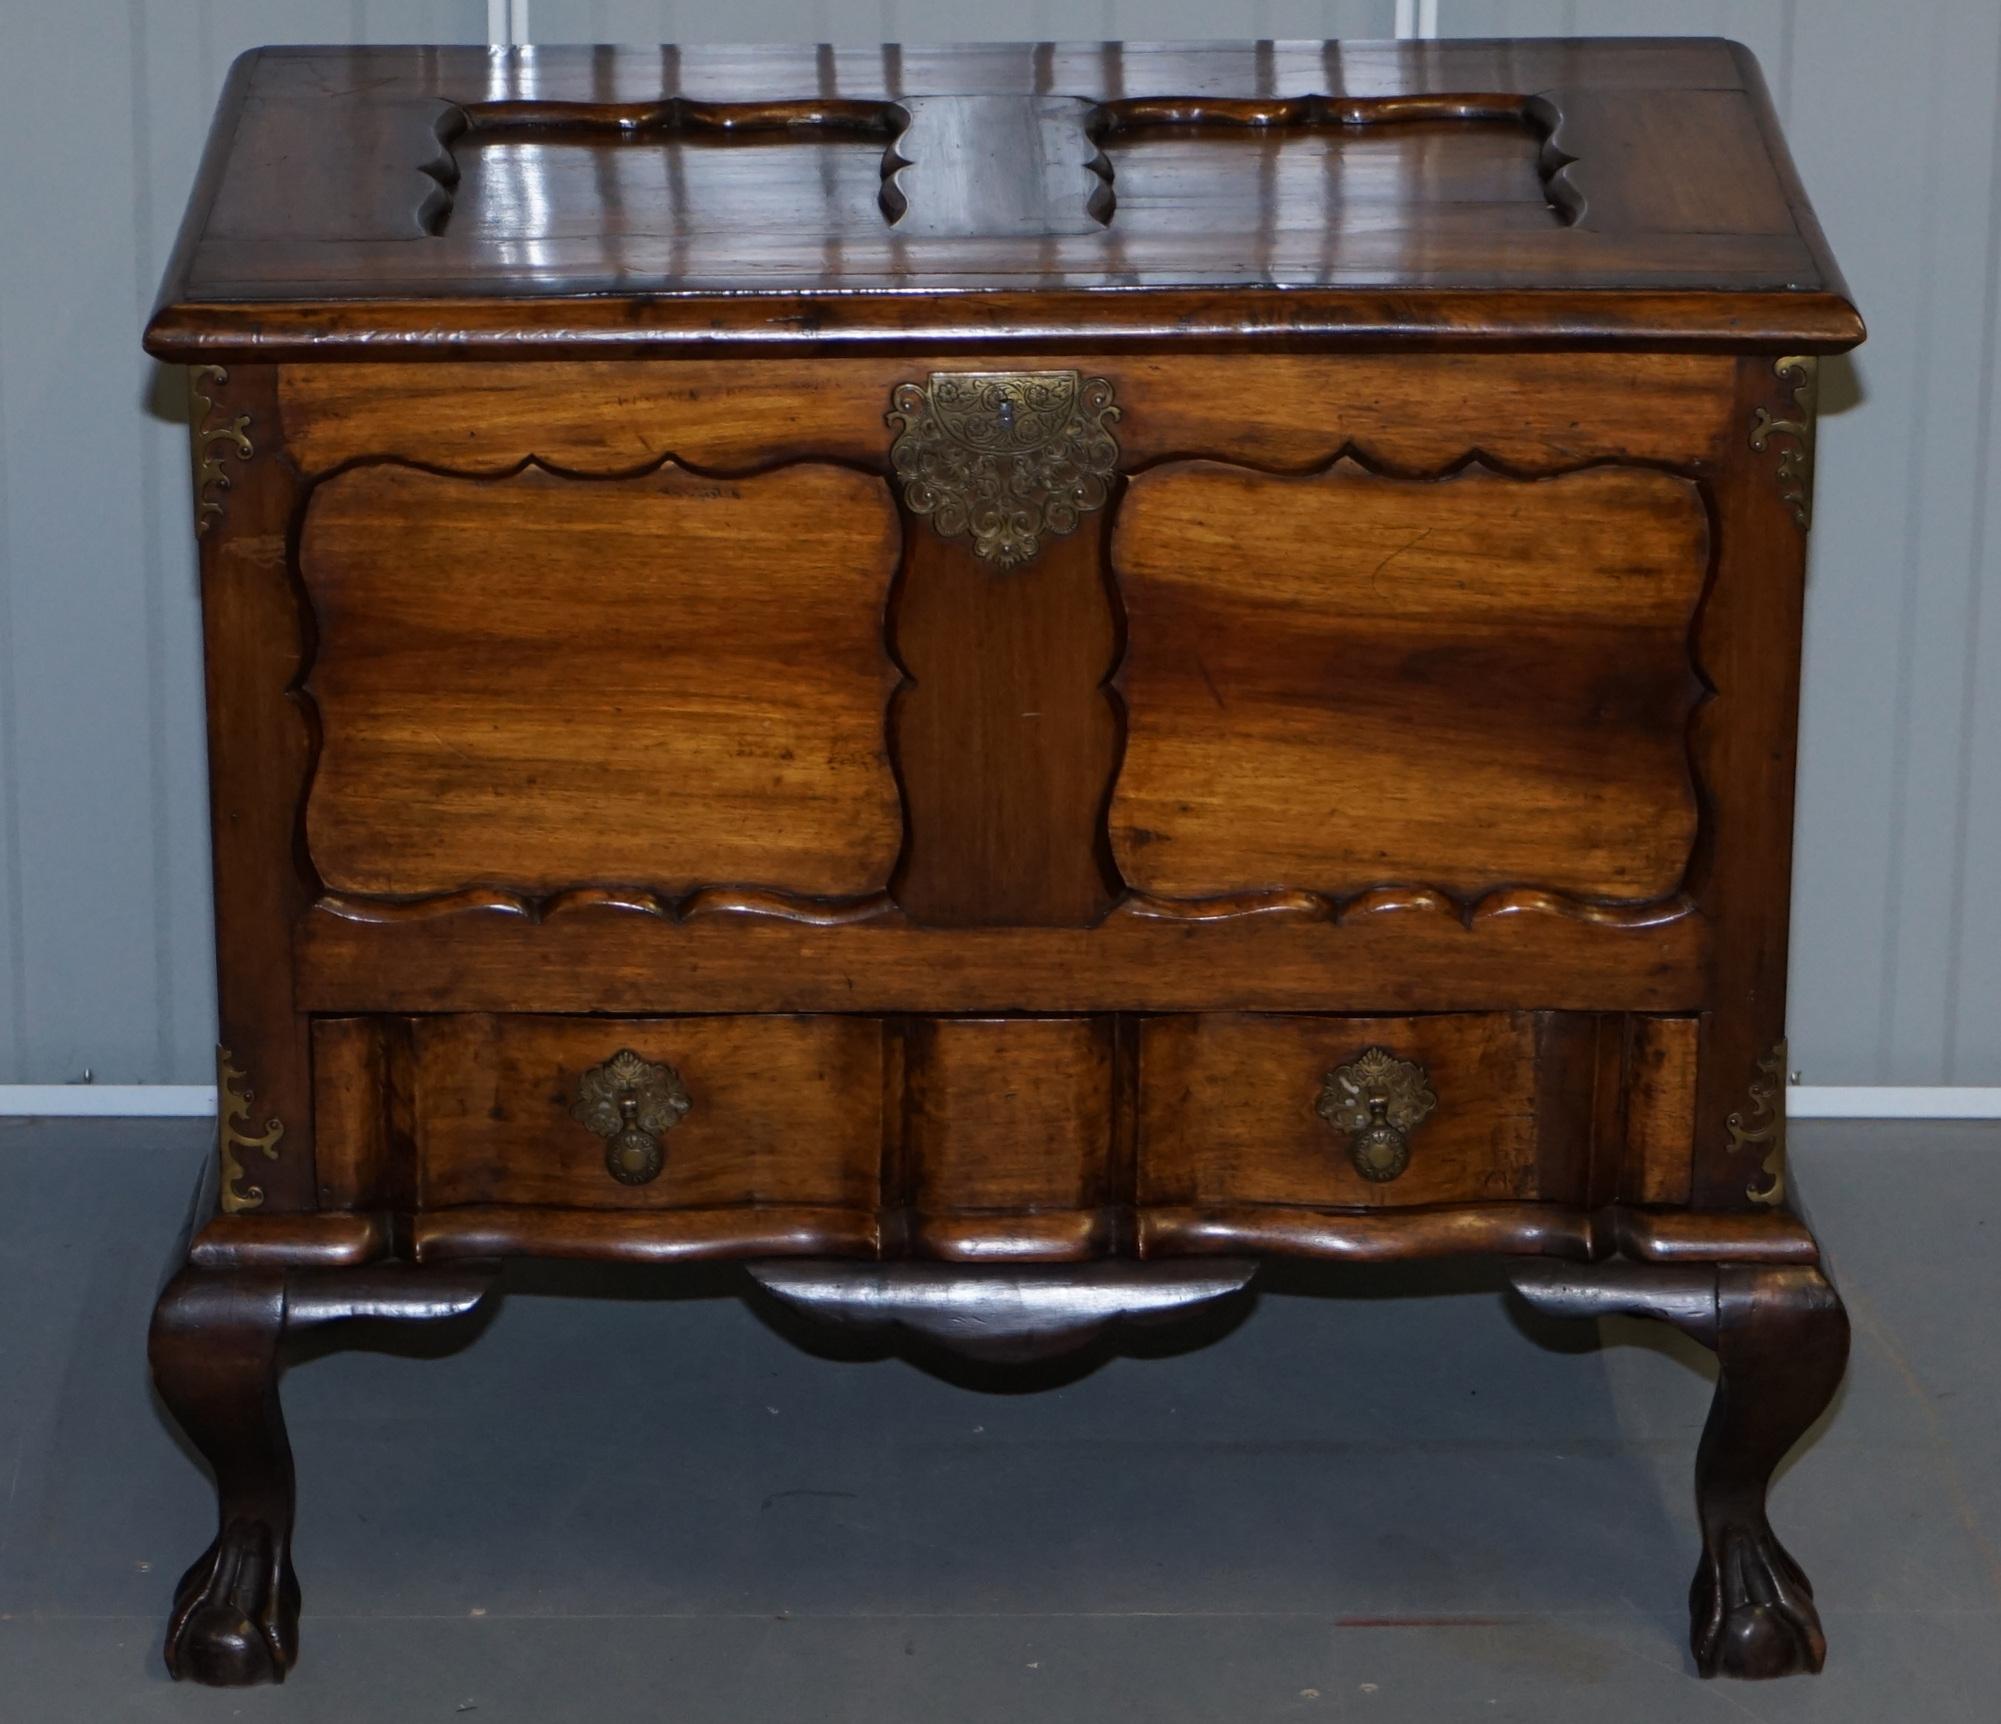 We are delighted to offer for sale this lovely solid mahogany trunk with single drawer and elegantly caved claw and ball feet

A very nice looking and multi functional piece of furniture, you have the main trunk section for storage, originally